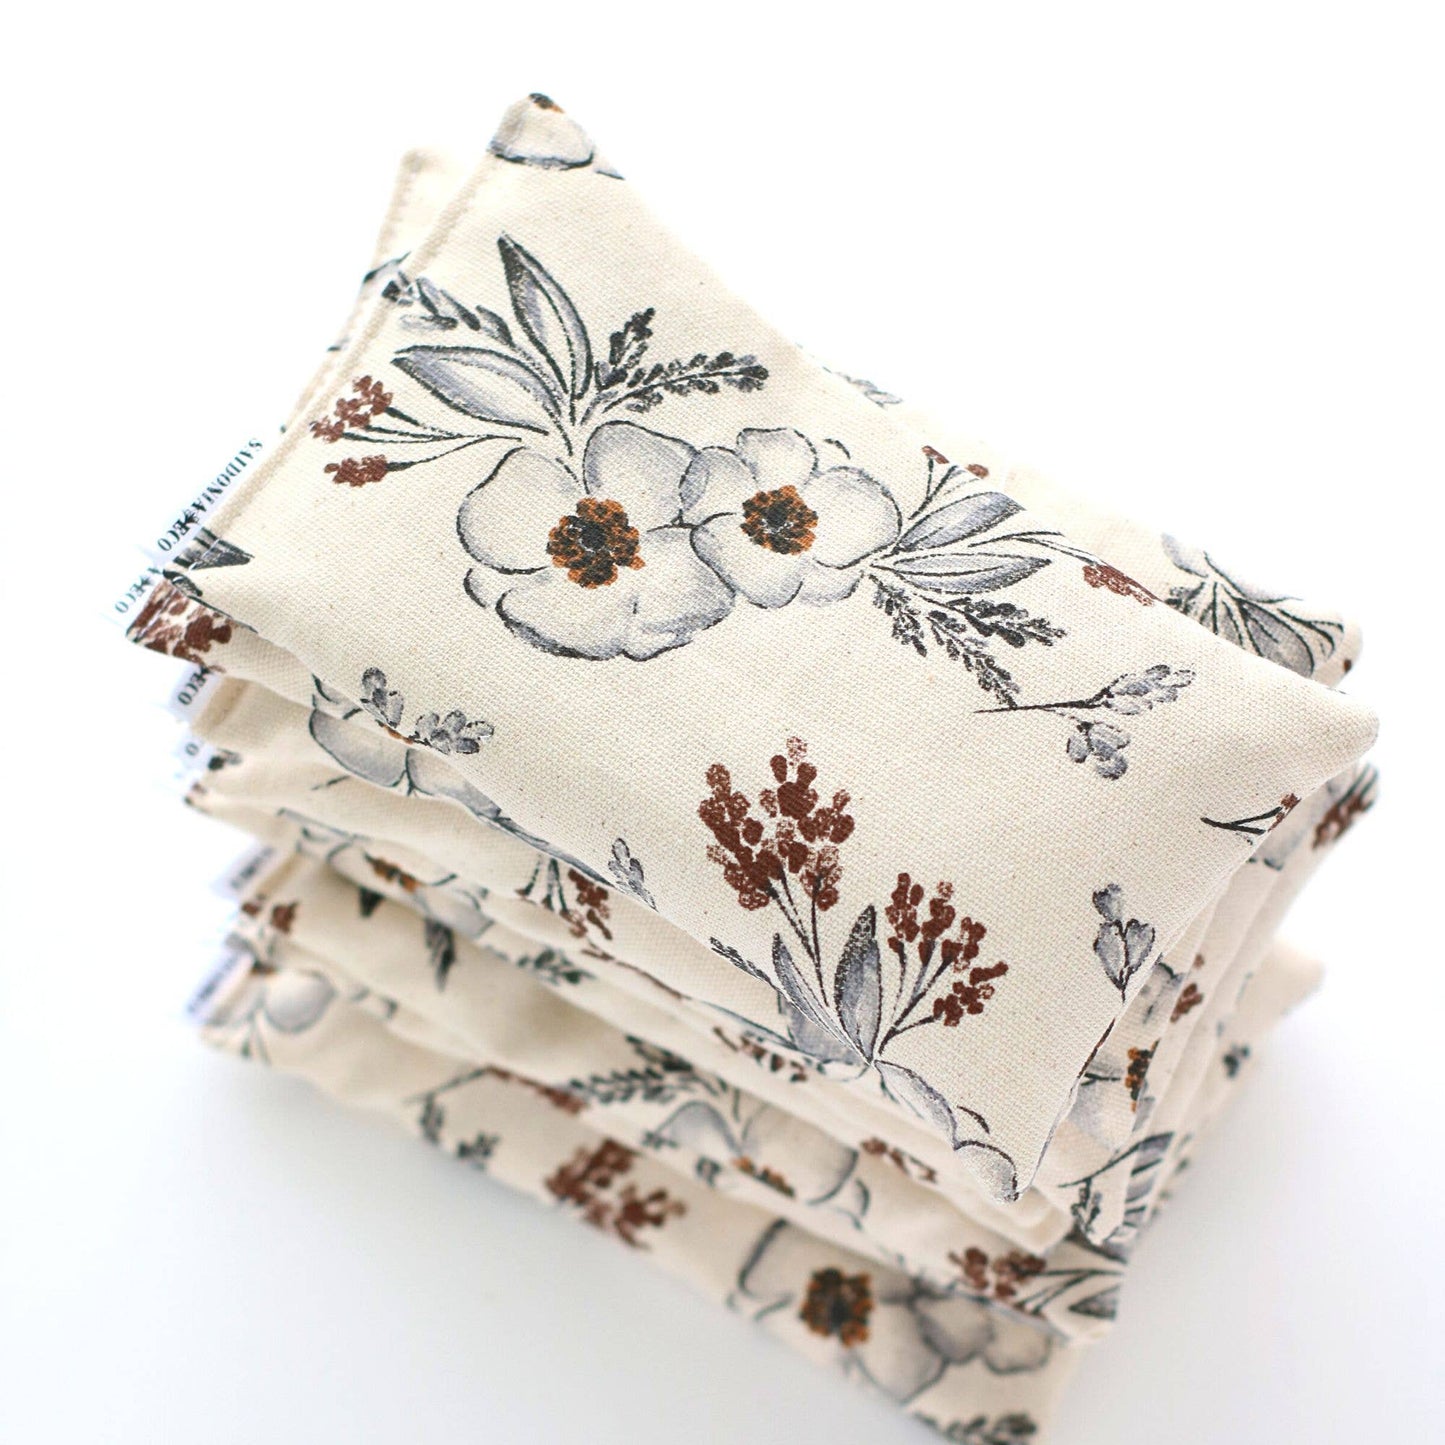 Relaxation Lavender Eye Pillow - Forest Tales